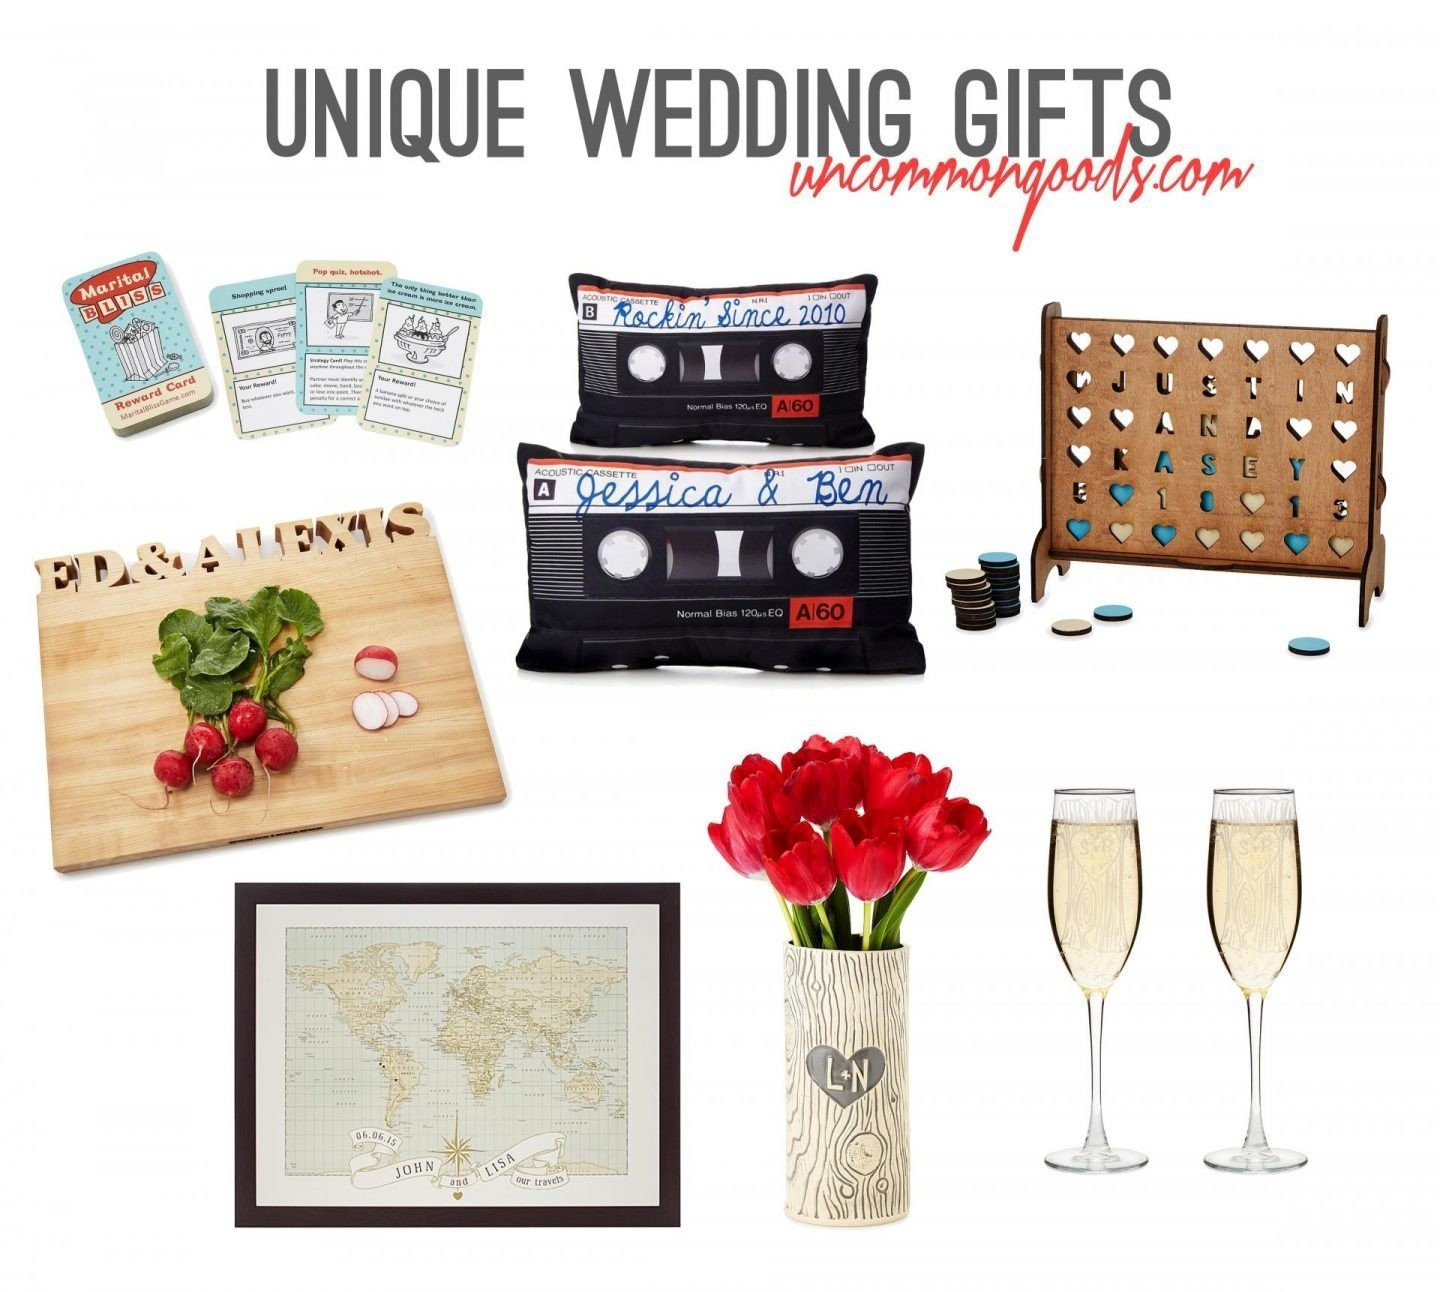 Wedding Gift Ideas For Second Marriage Older Couple
 10 Fashionable Wedding Gift Ideas For Second Marriages 2019